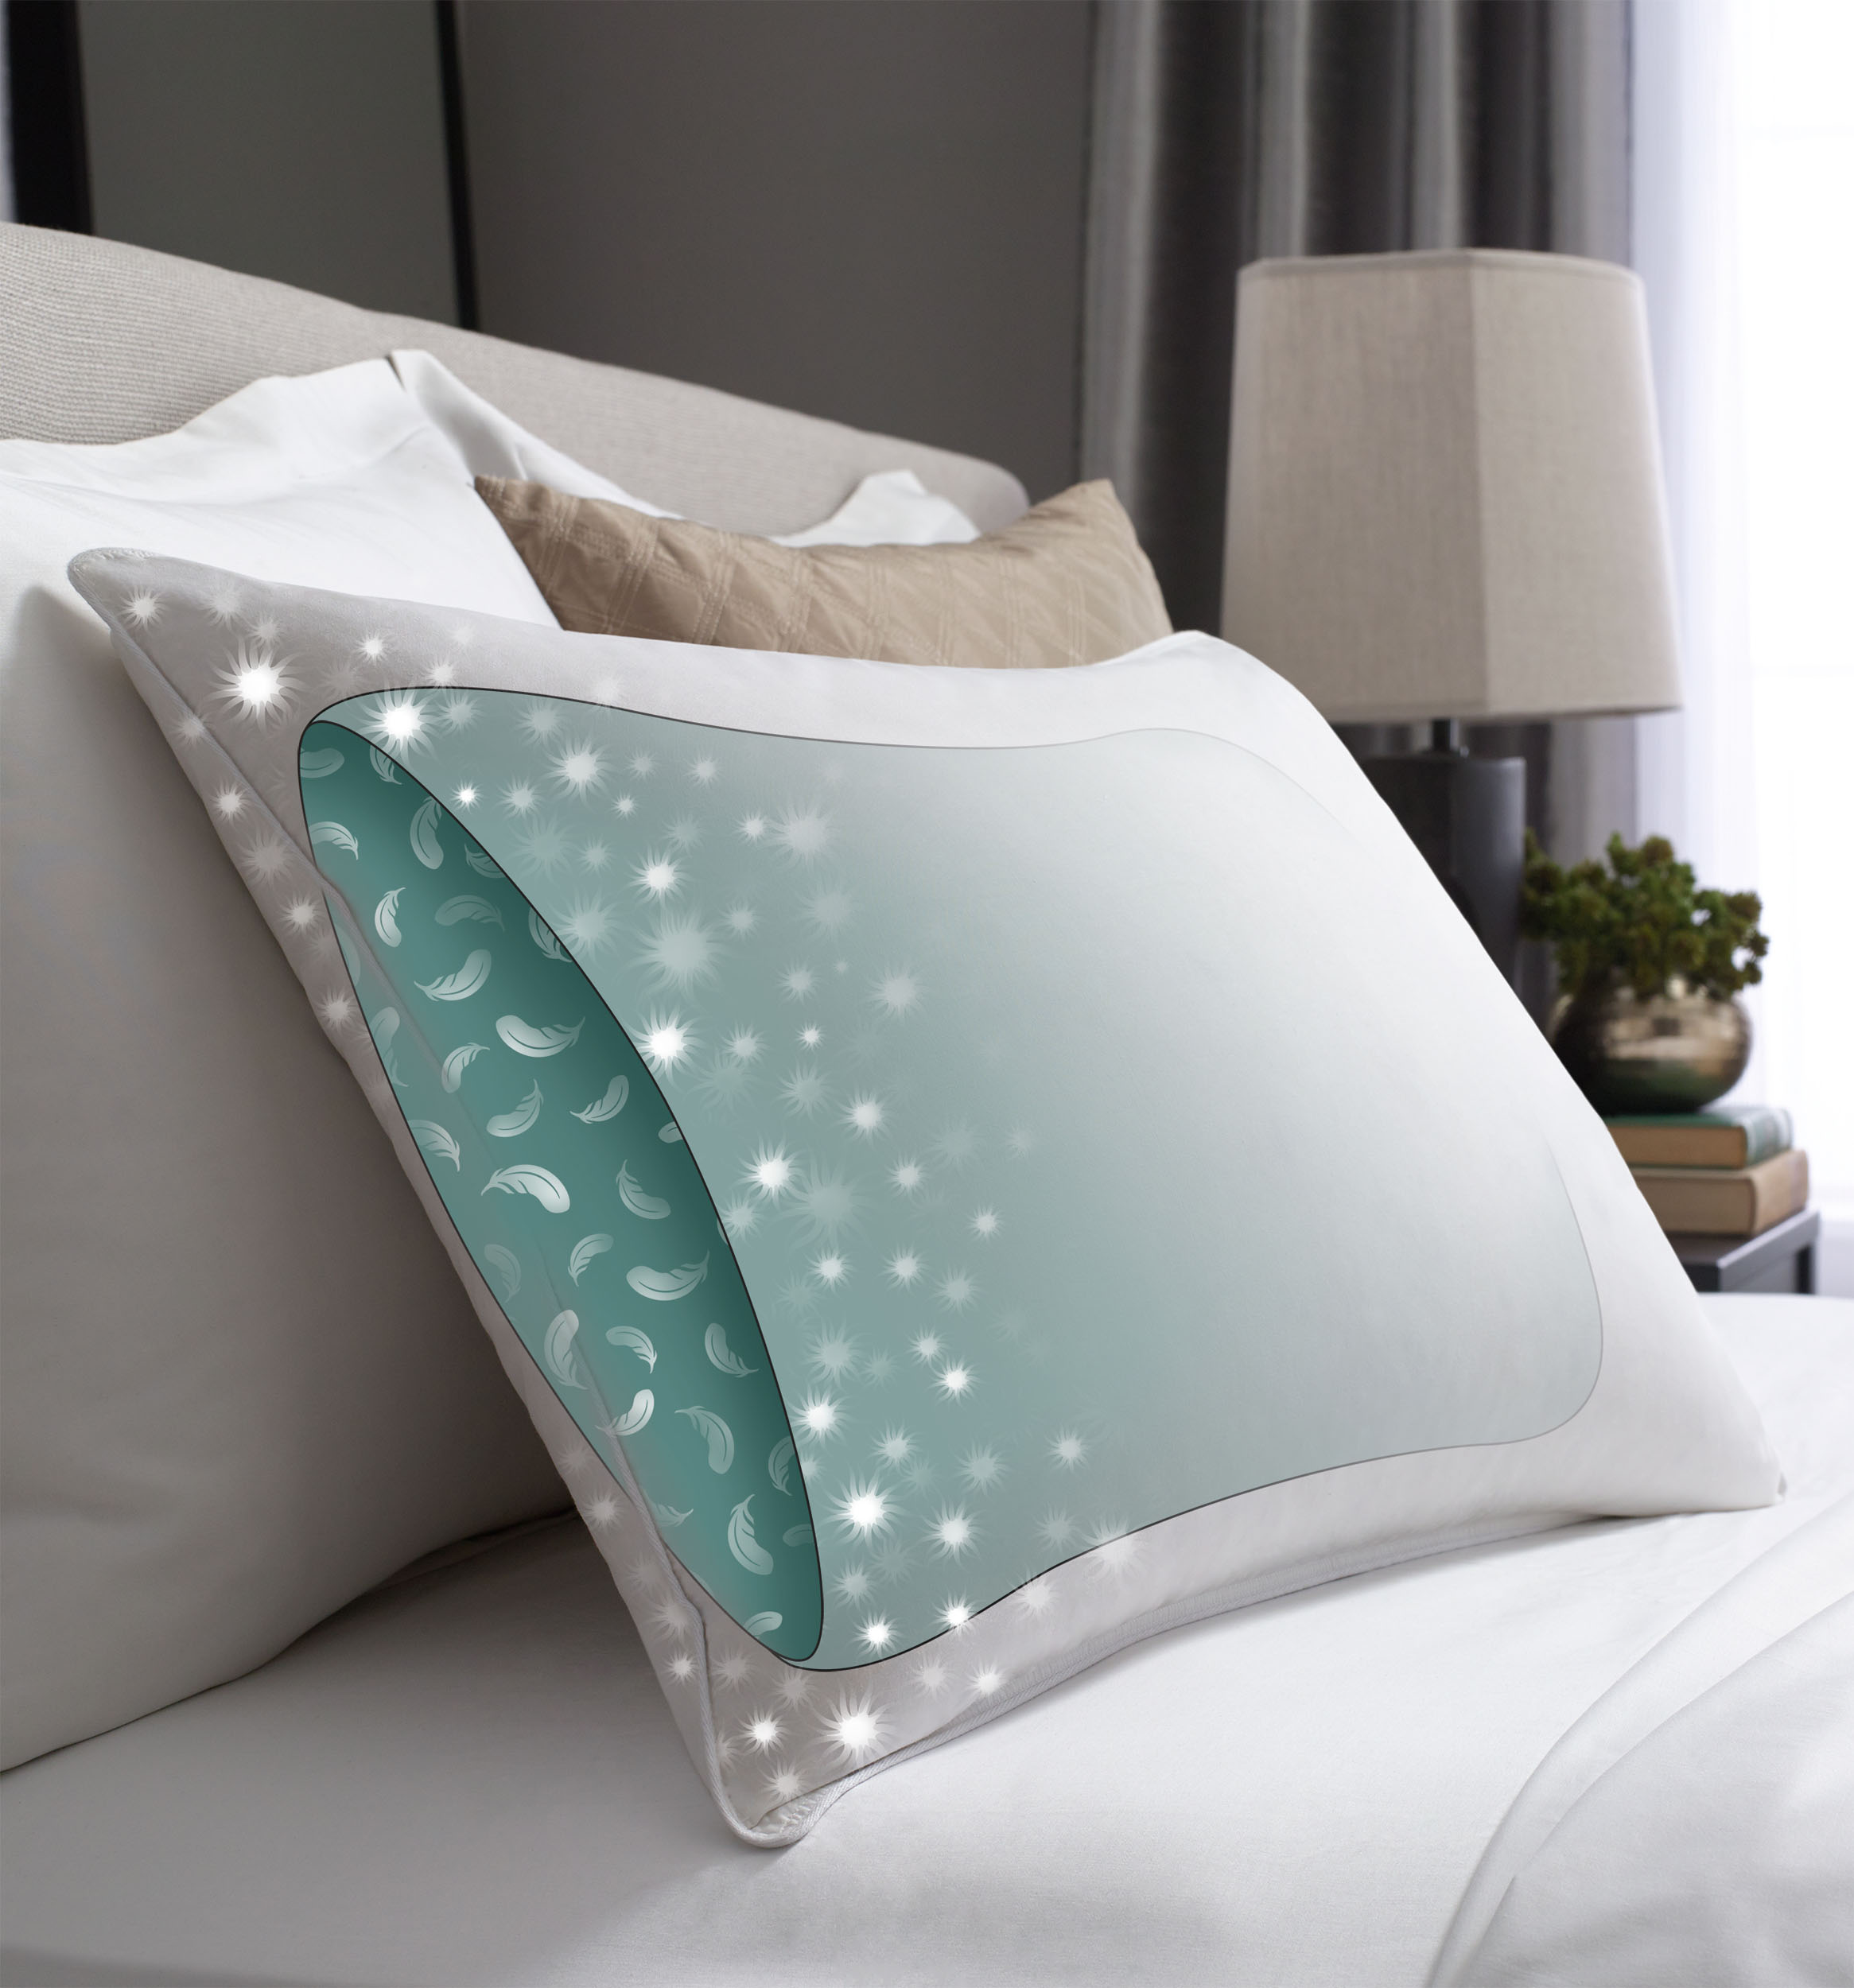 The Hotel Collection Best Hotel Pillows 